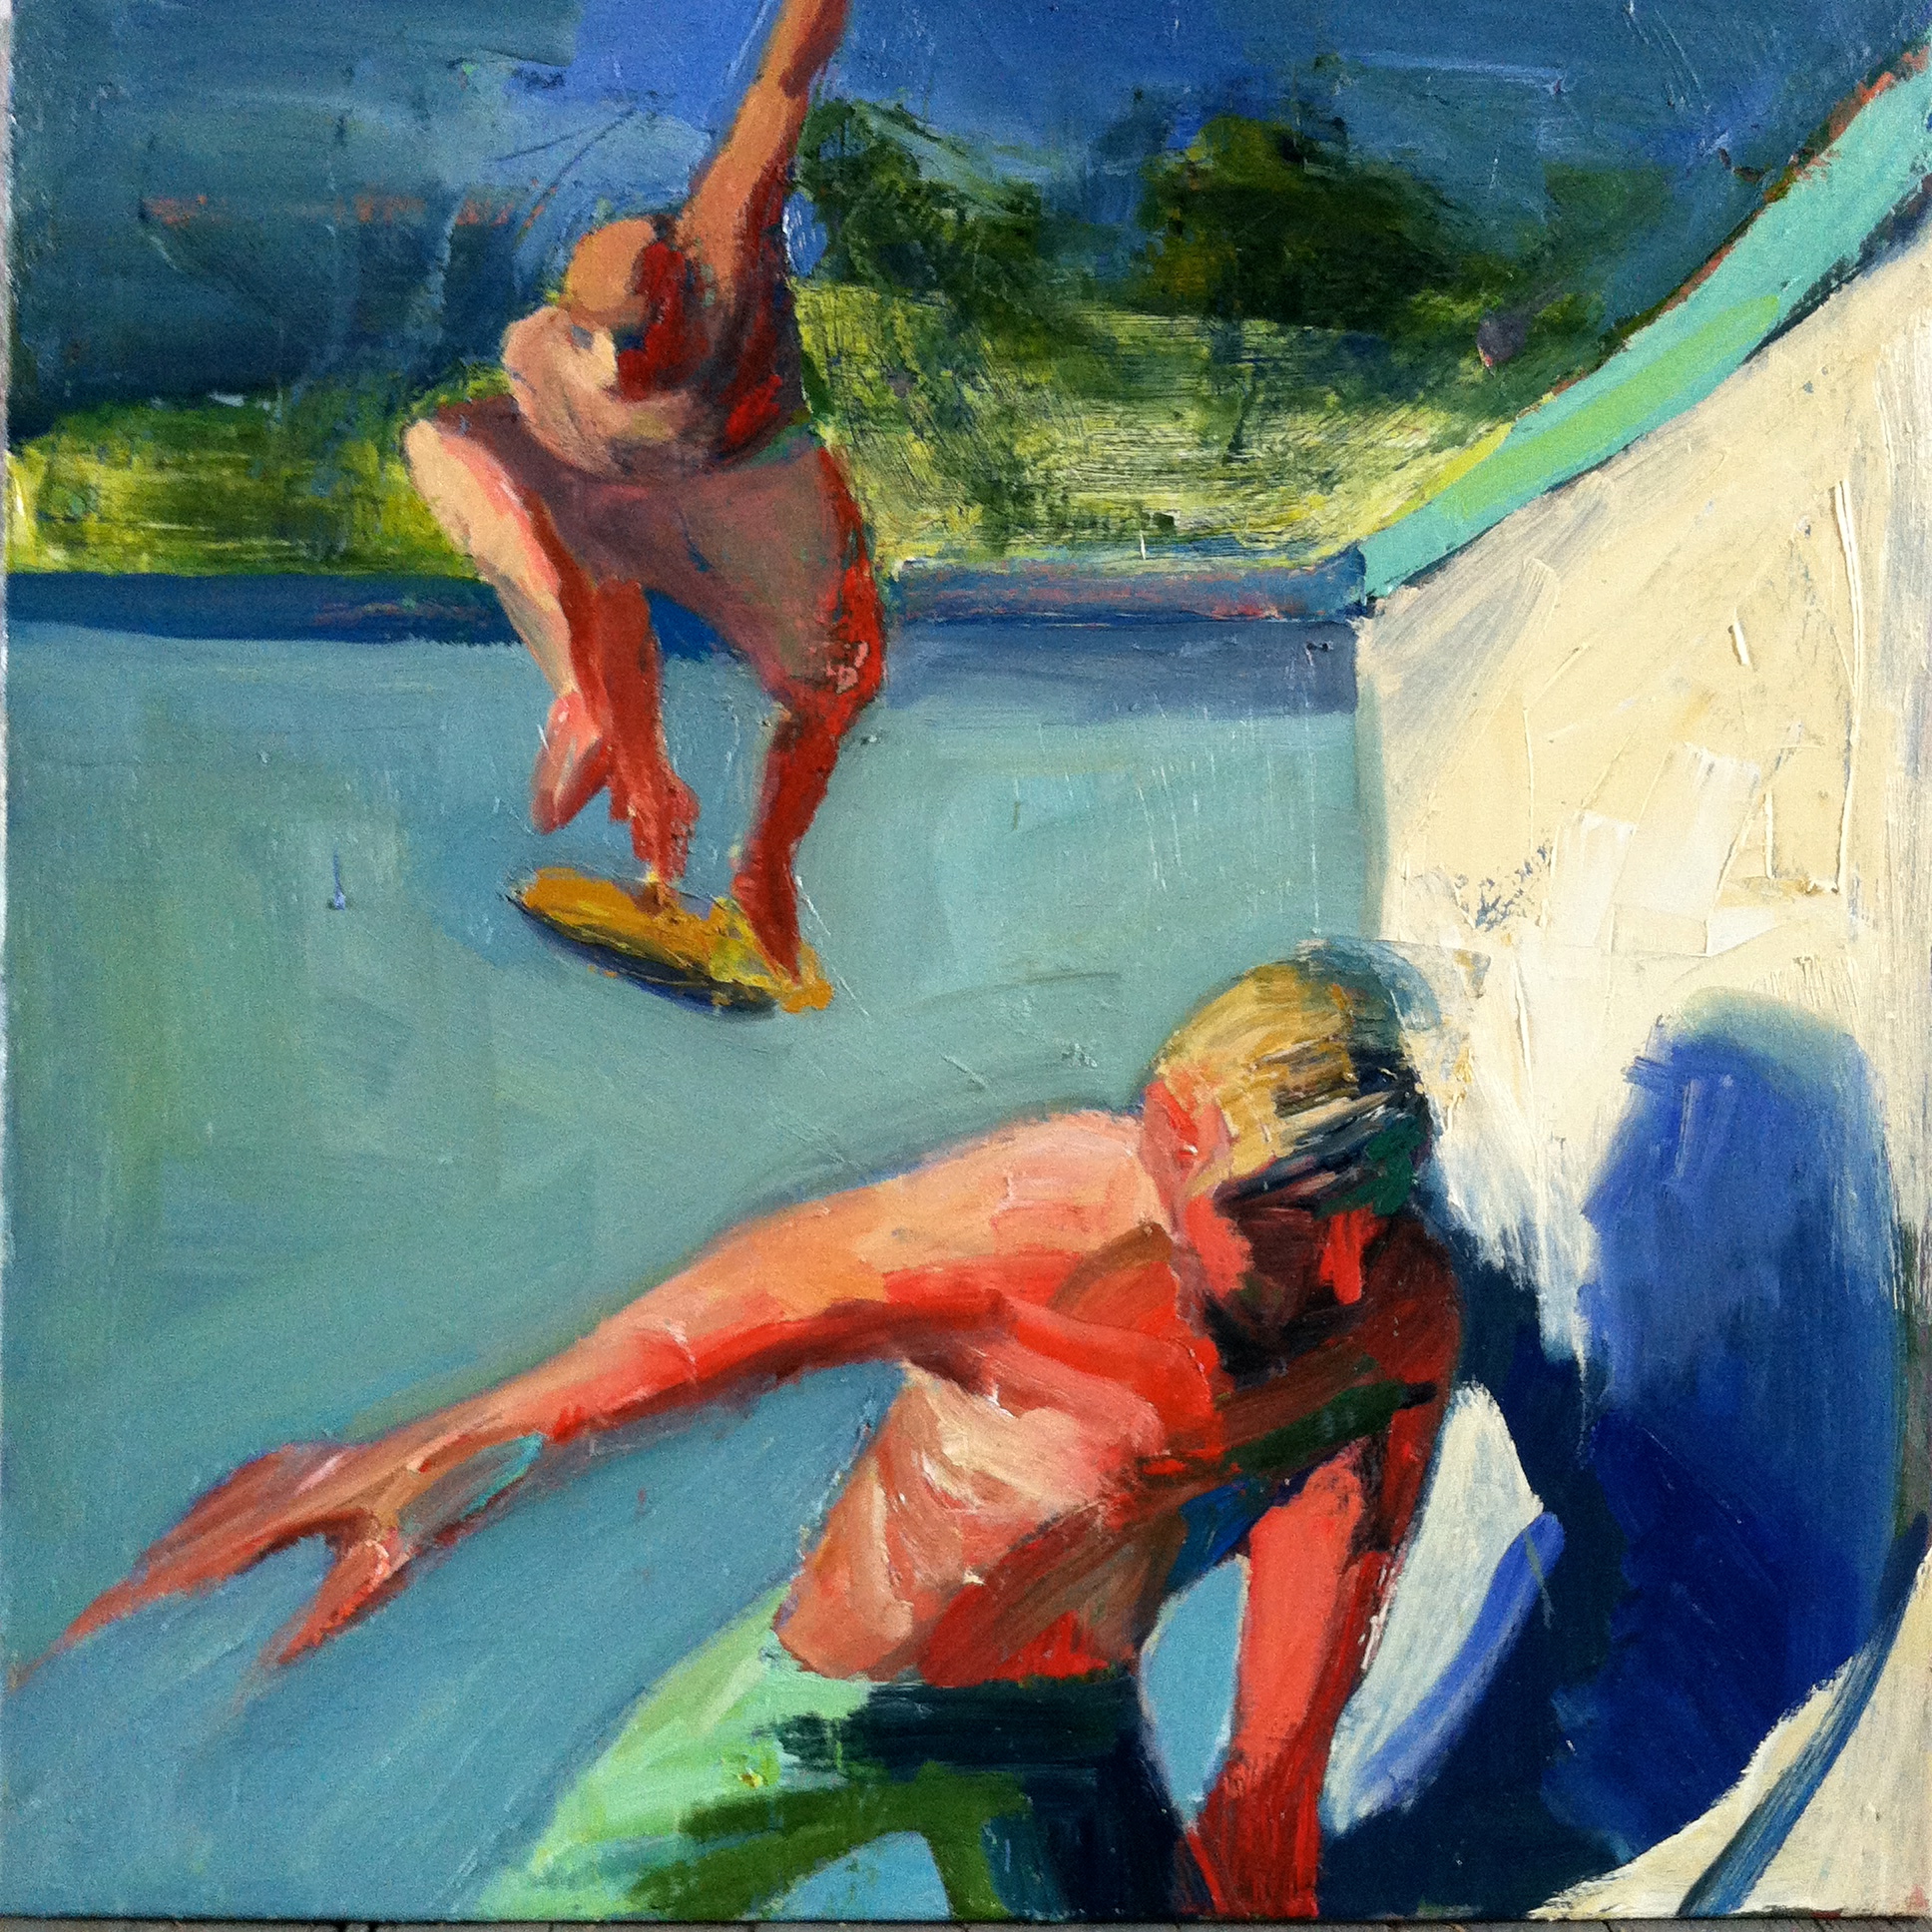  Dropping in, oil on canvas, 30x30 inches, 2016 